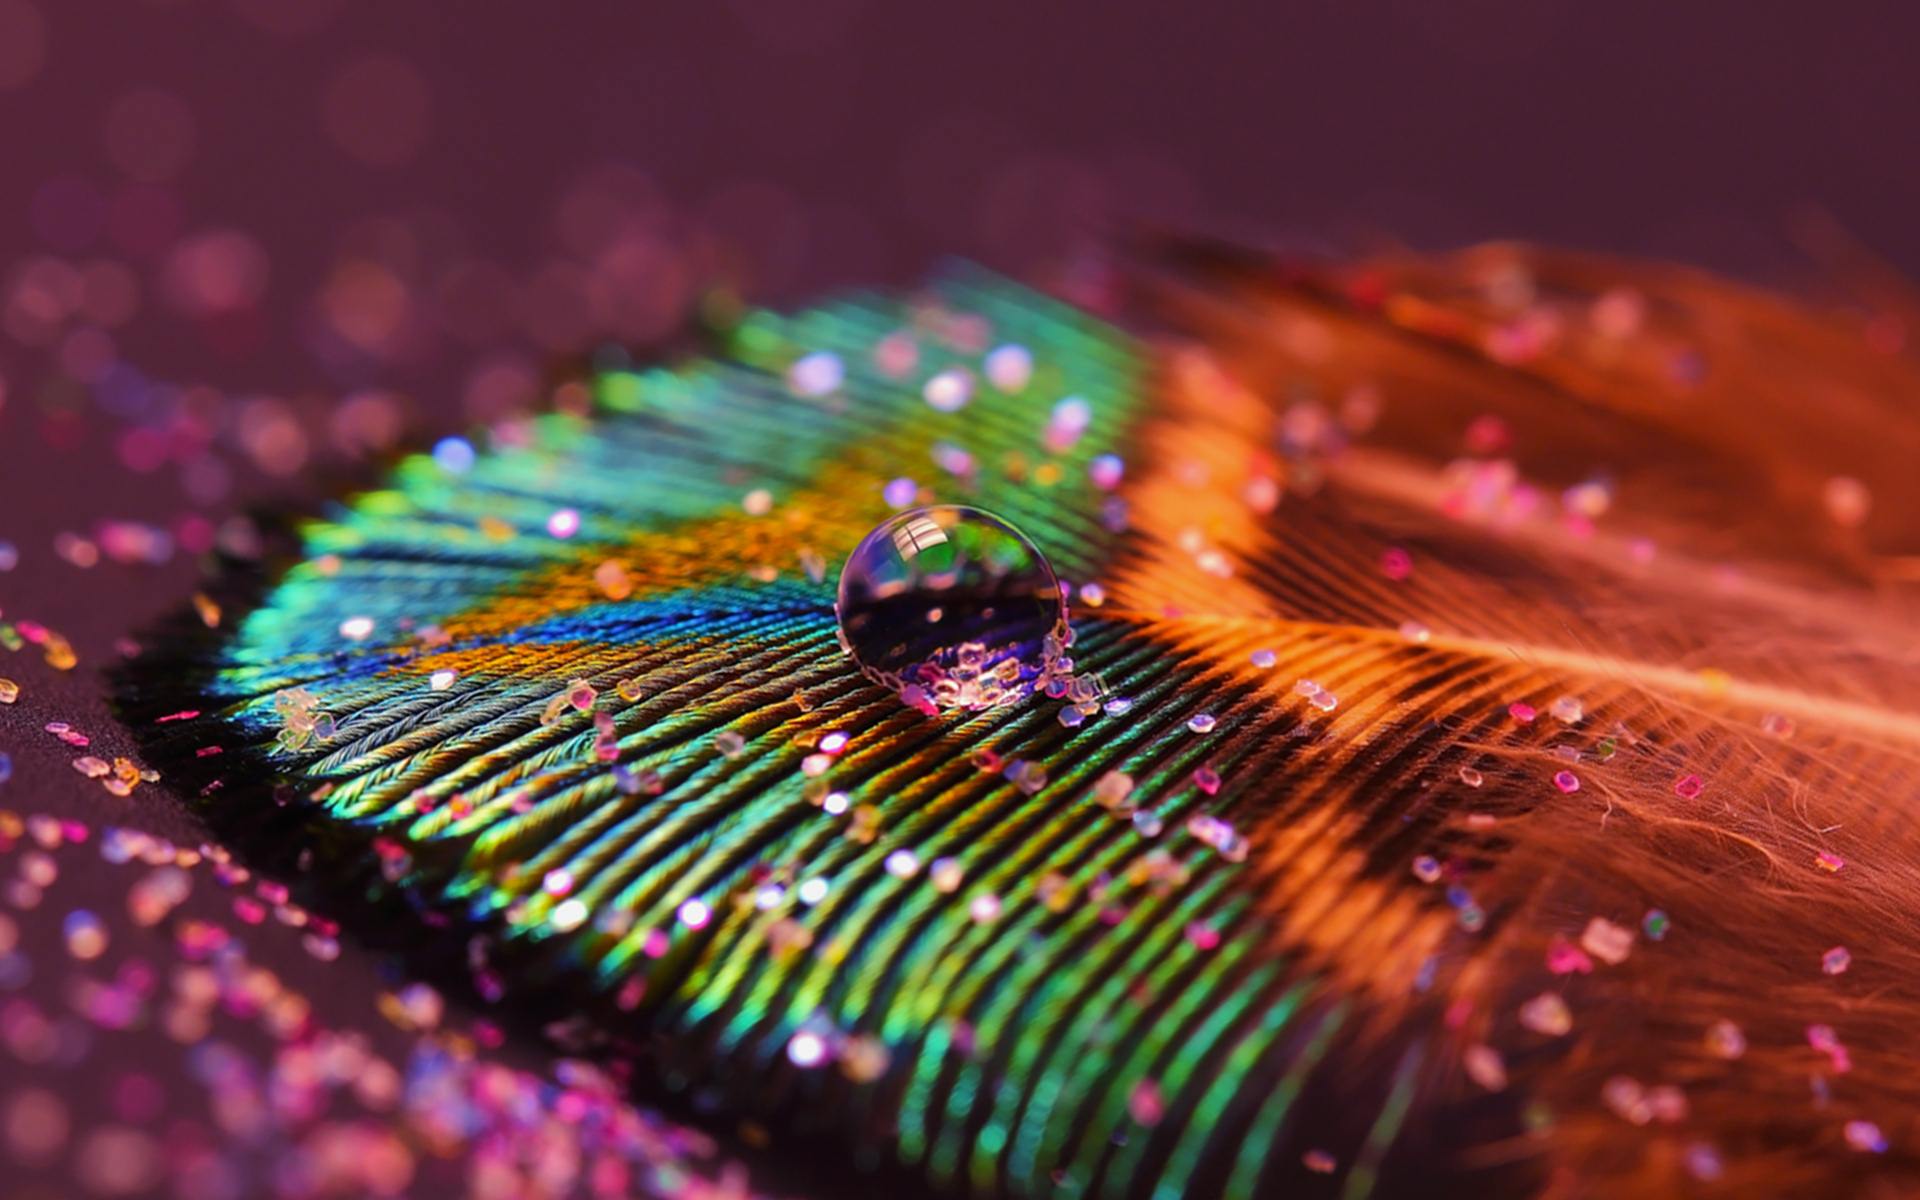 Beautiful Peacock Feather Image. HD Wallpaper Image